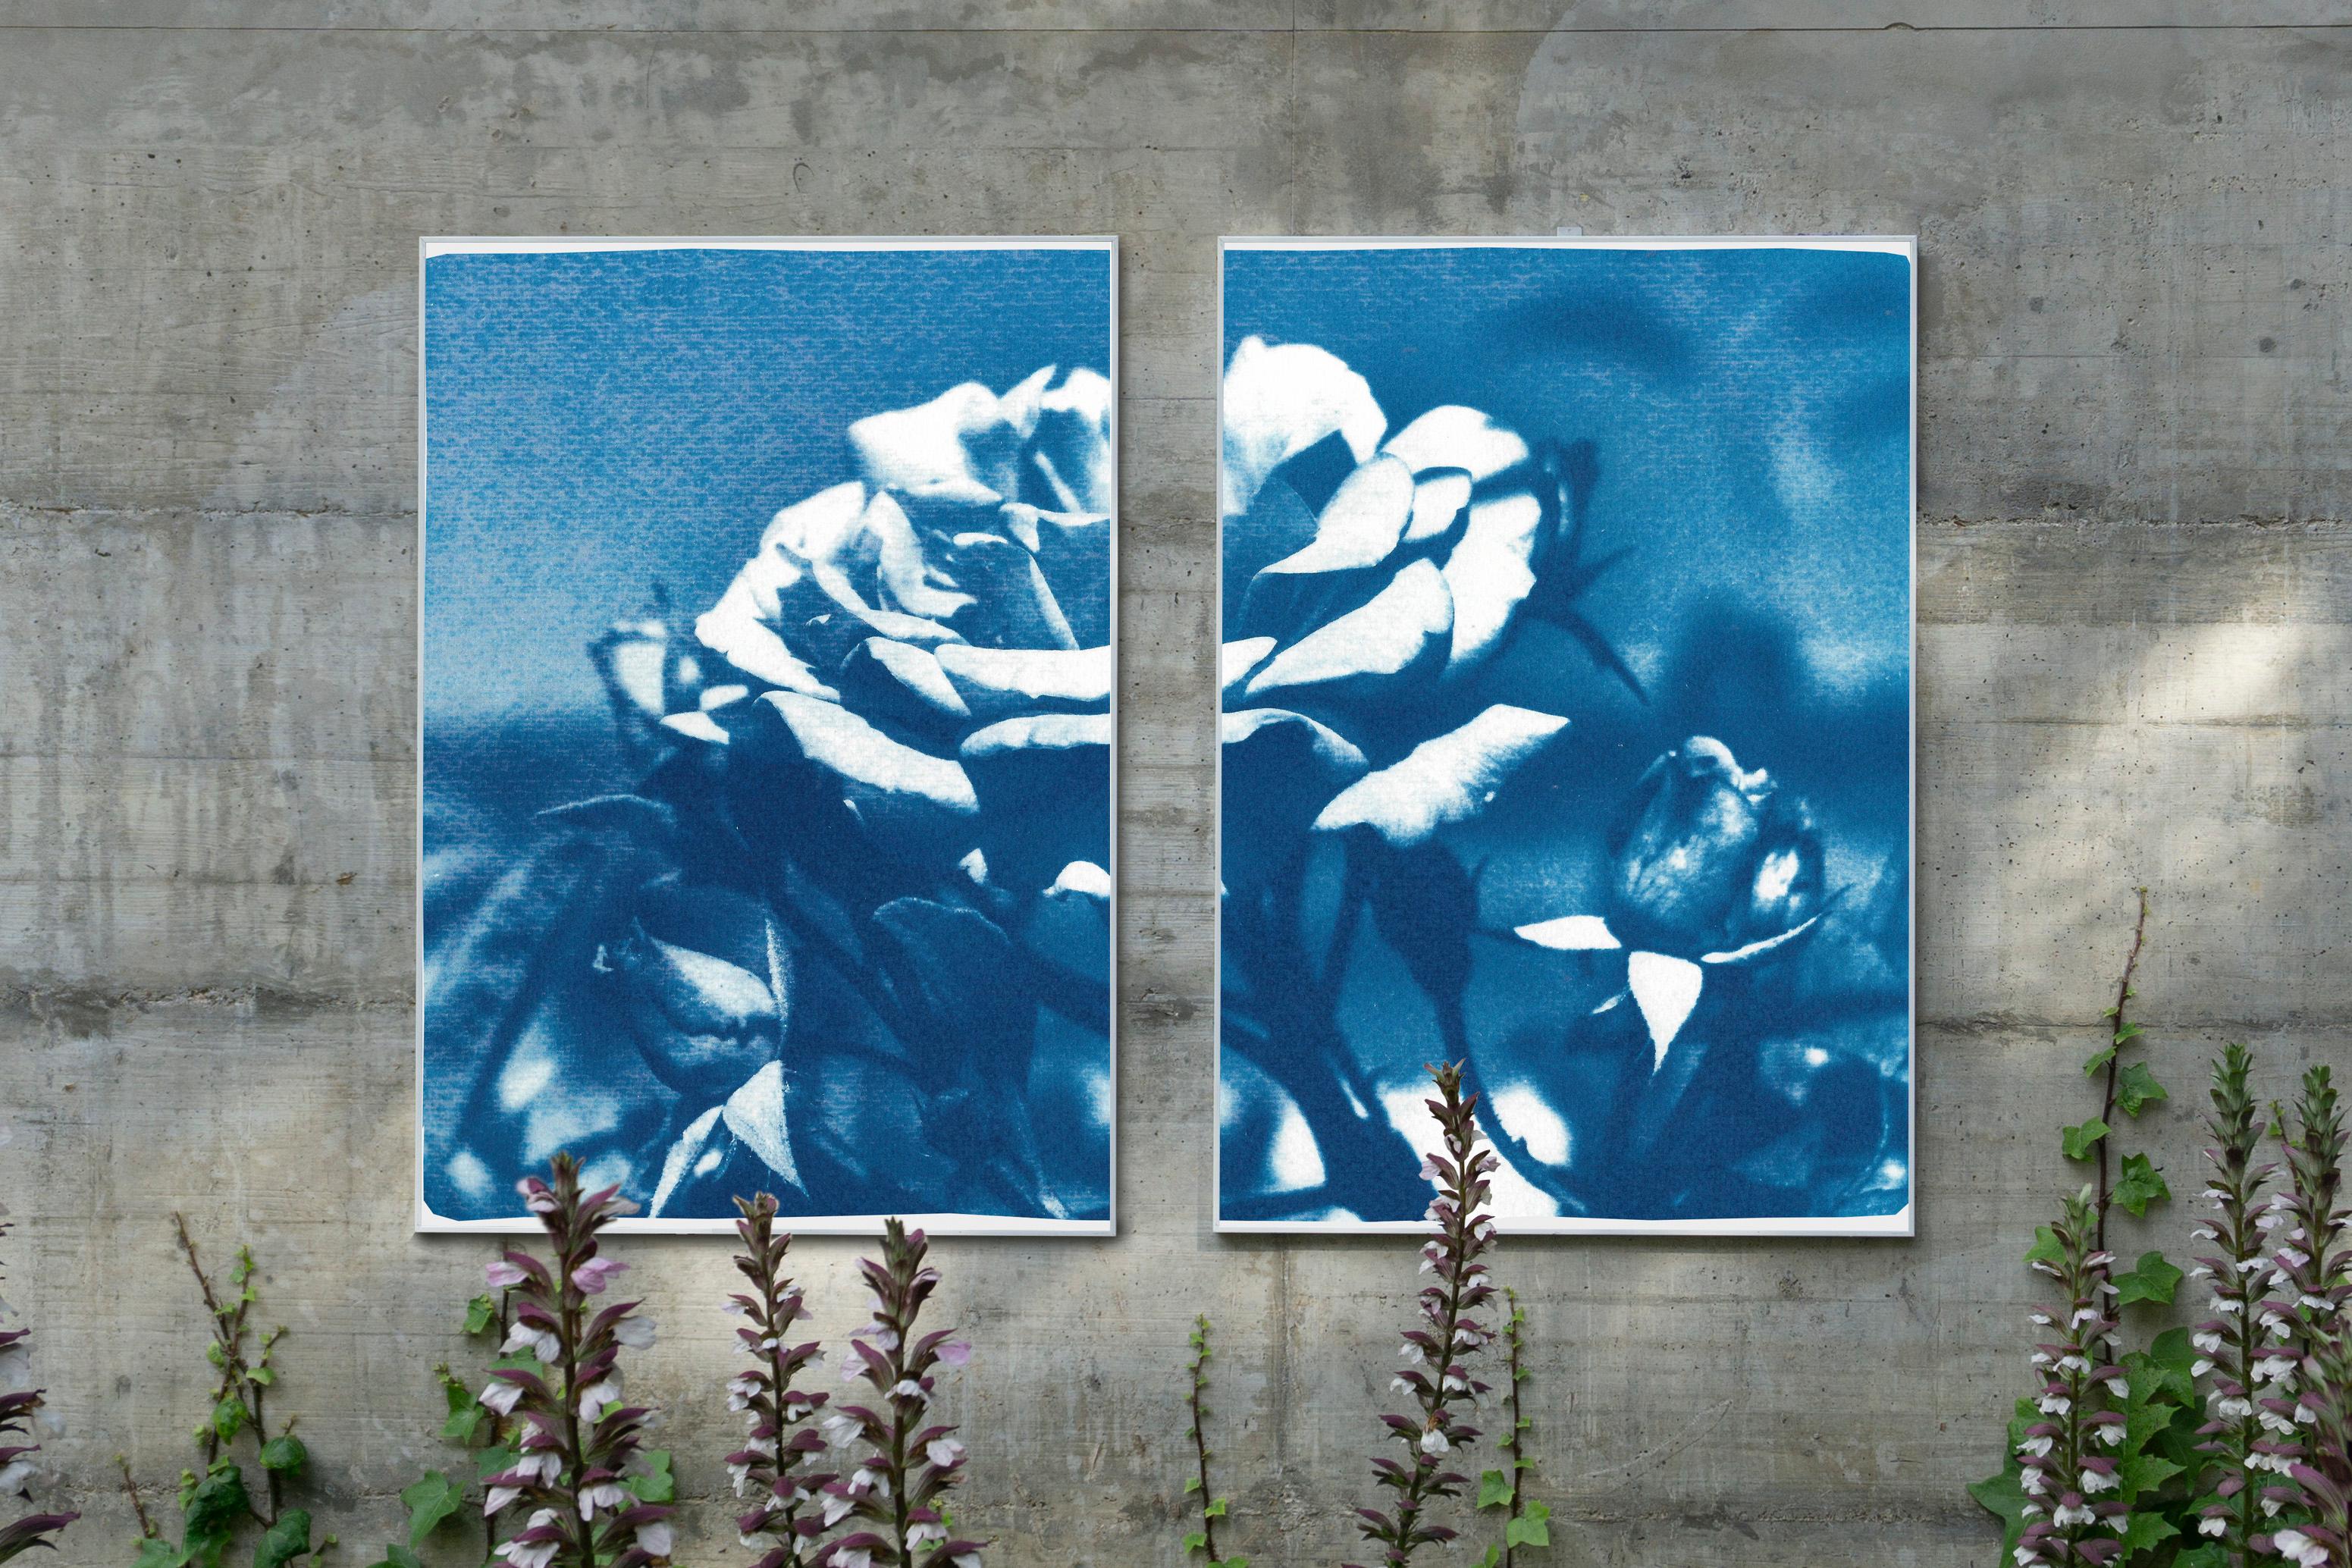 Wild Blue Flowers, Large Still Life Diptych, Cyanotype Print on Watercolor Paper 1